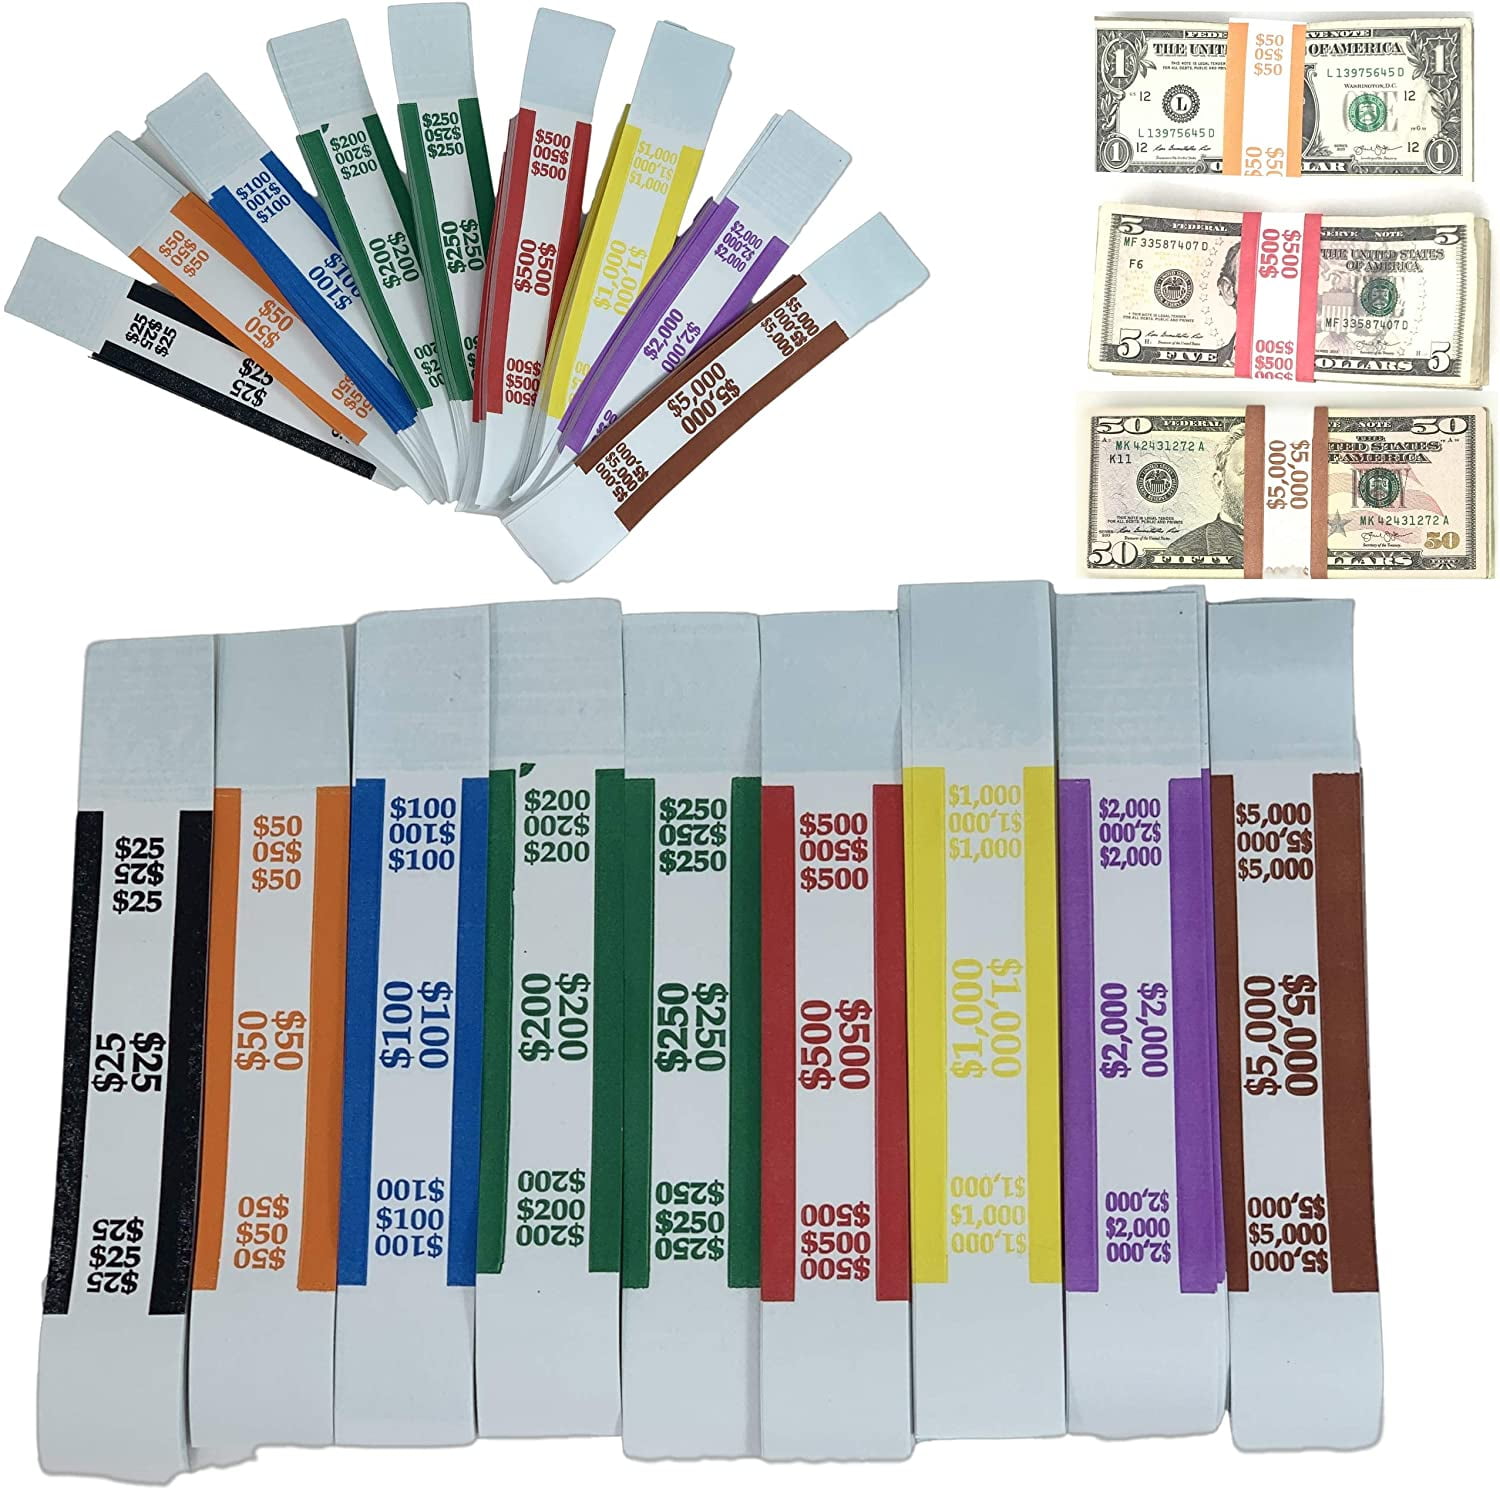 25 USA currency straps $5 bills Self Sealing money bands 500 red 